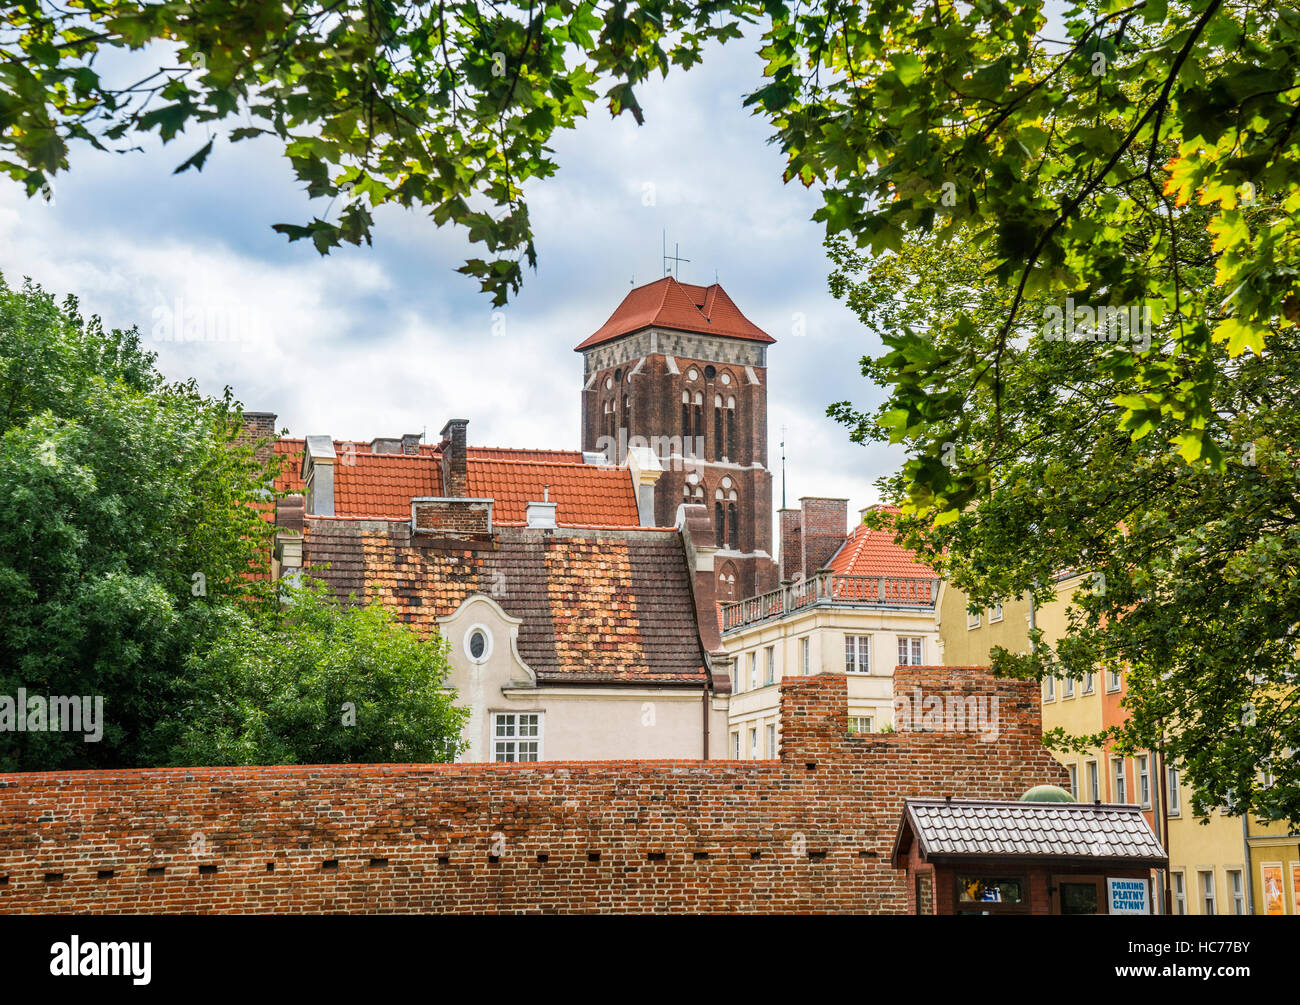 Poland, Pomerania, Gdansk (Danzig), remains of medieval city walls at the former Strawberry Market with view of St. Mary's Church Stock Photo